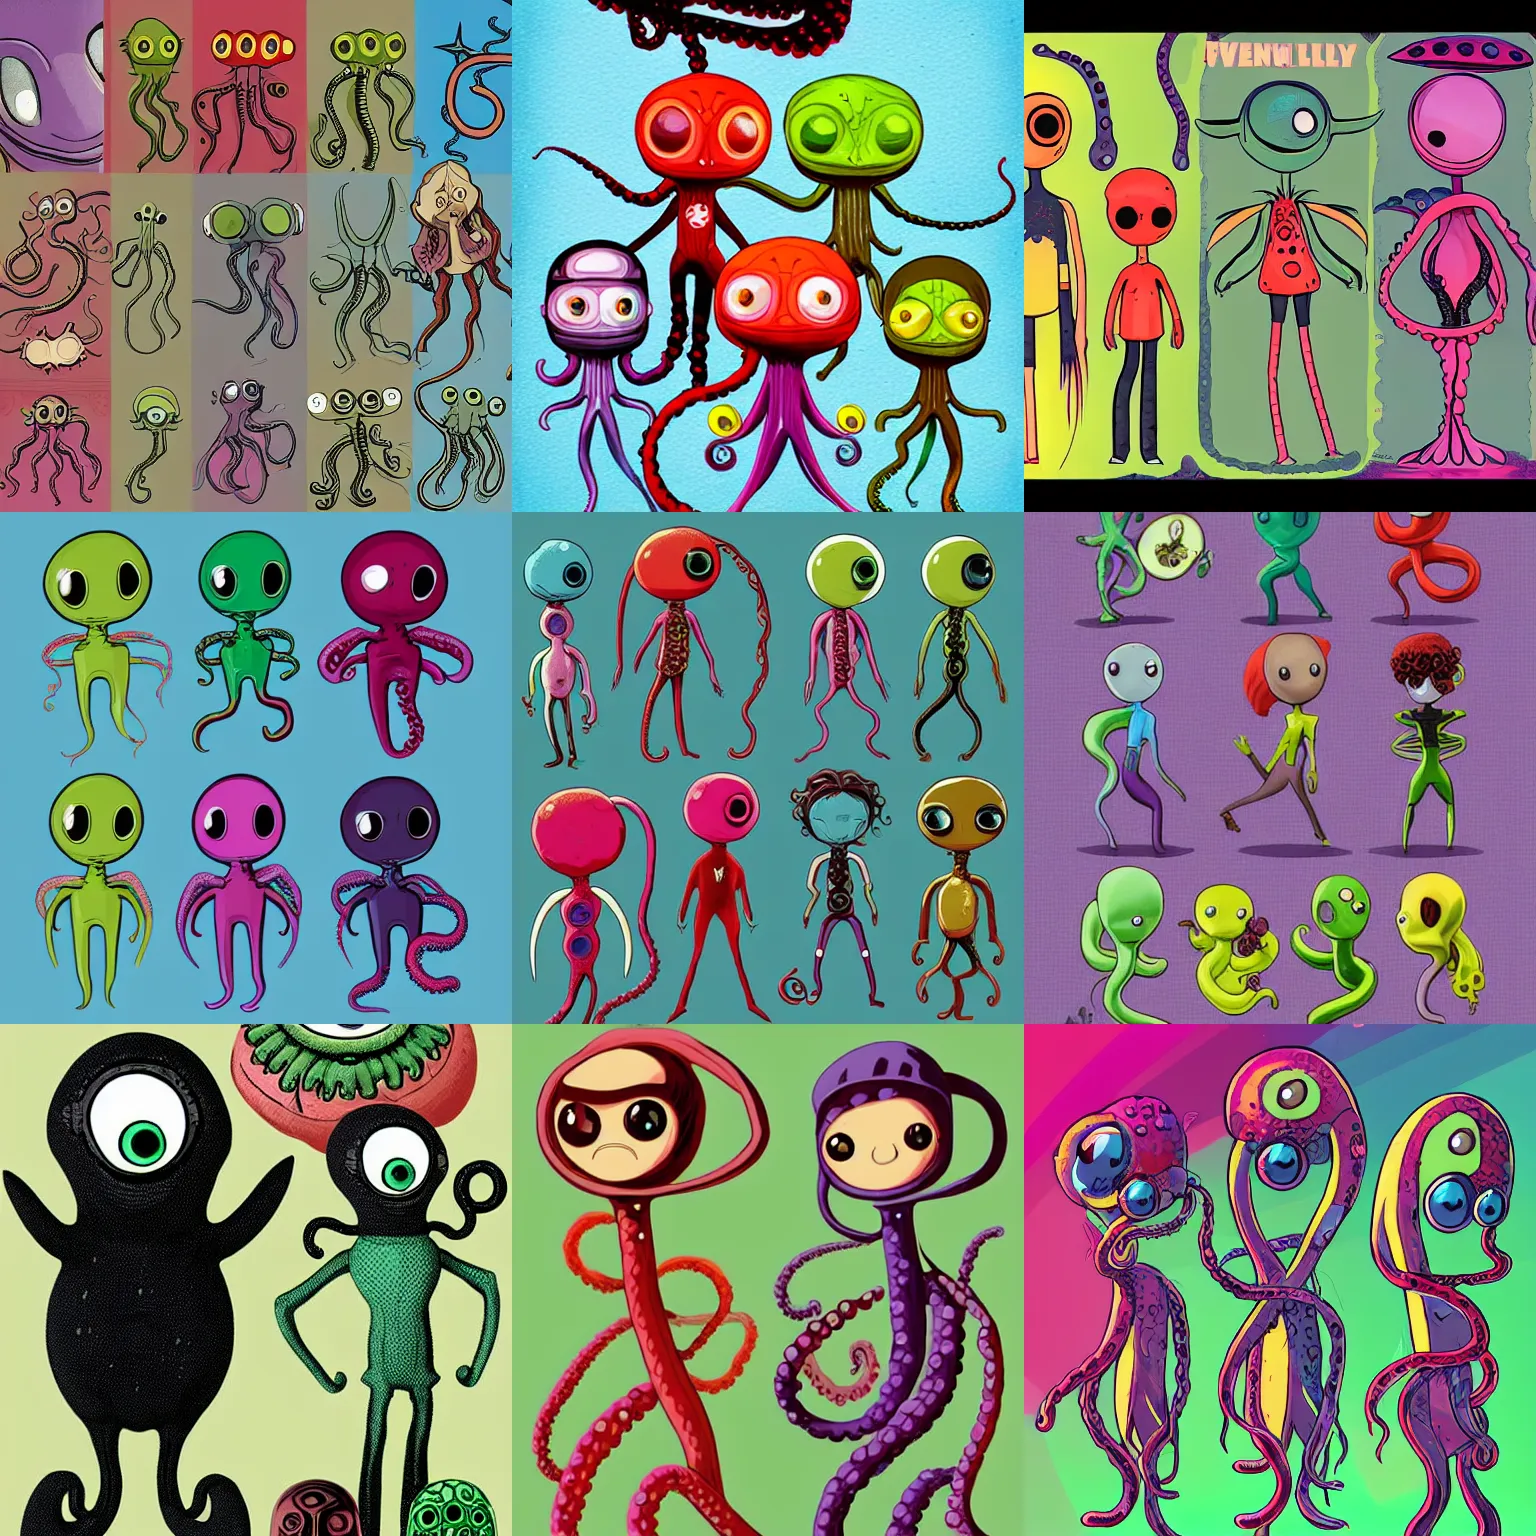 Prompt: vintage colorful friend shaped little bean aliens with big black alien eyes with webbed tentacle arms and skinny thin human legs as playable characters design sheets for the newest psychonauts video game made by double fine done by tim shafer that focuses on an ocean setting with help from the artists of odd world inhabitants inc and Lauren faust from her work on dc superhero girls and lead artist Andy Suriano from rise of the teenage mutant ninja turtles on nickelodeon using artistic cues for the game fret nice